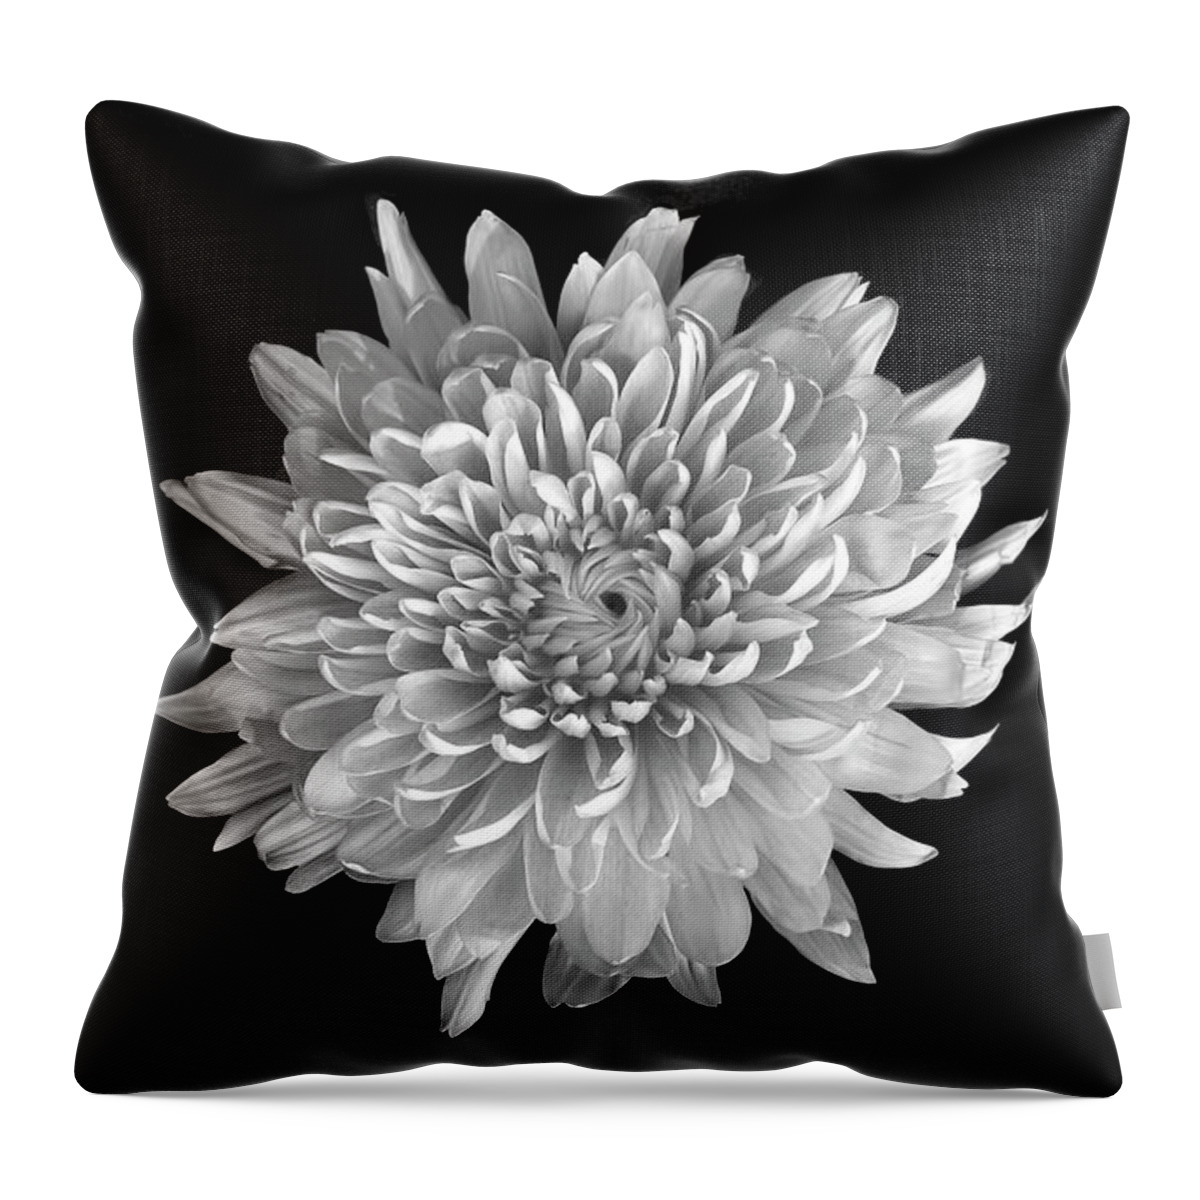 Flower Throw Pillow featuring the photograph Blooming Chrysanthemum by Lori Hutchison